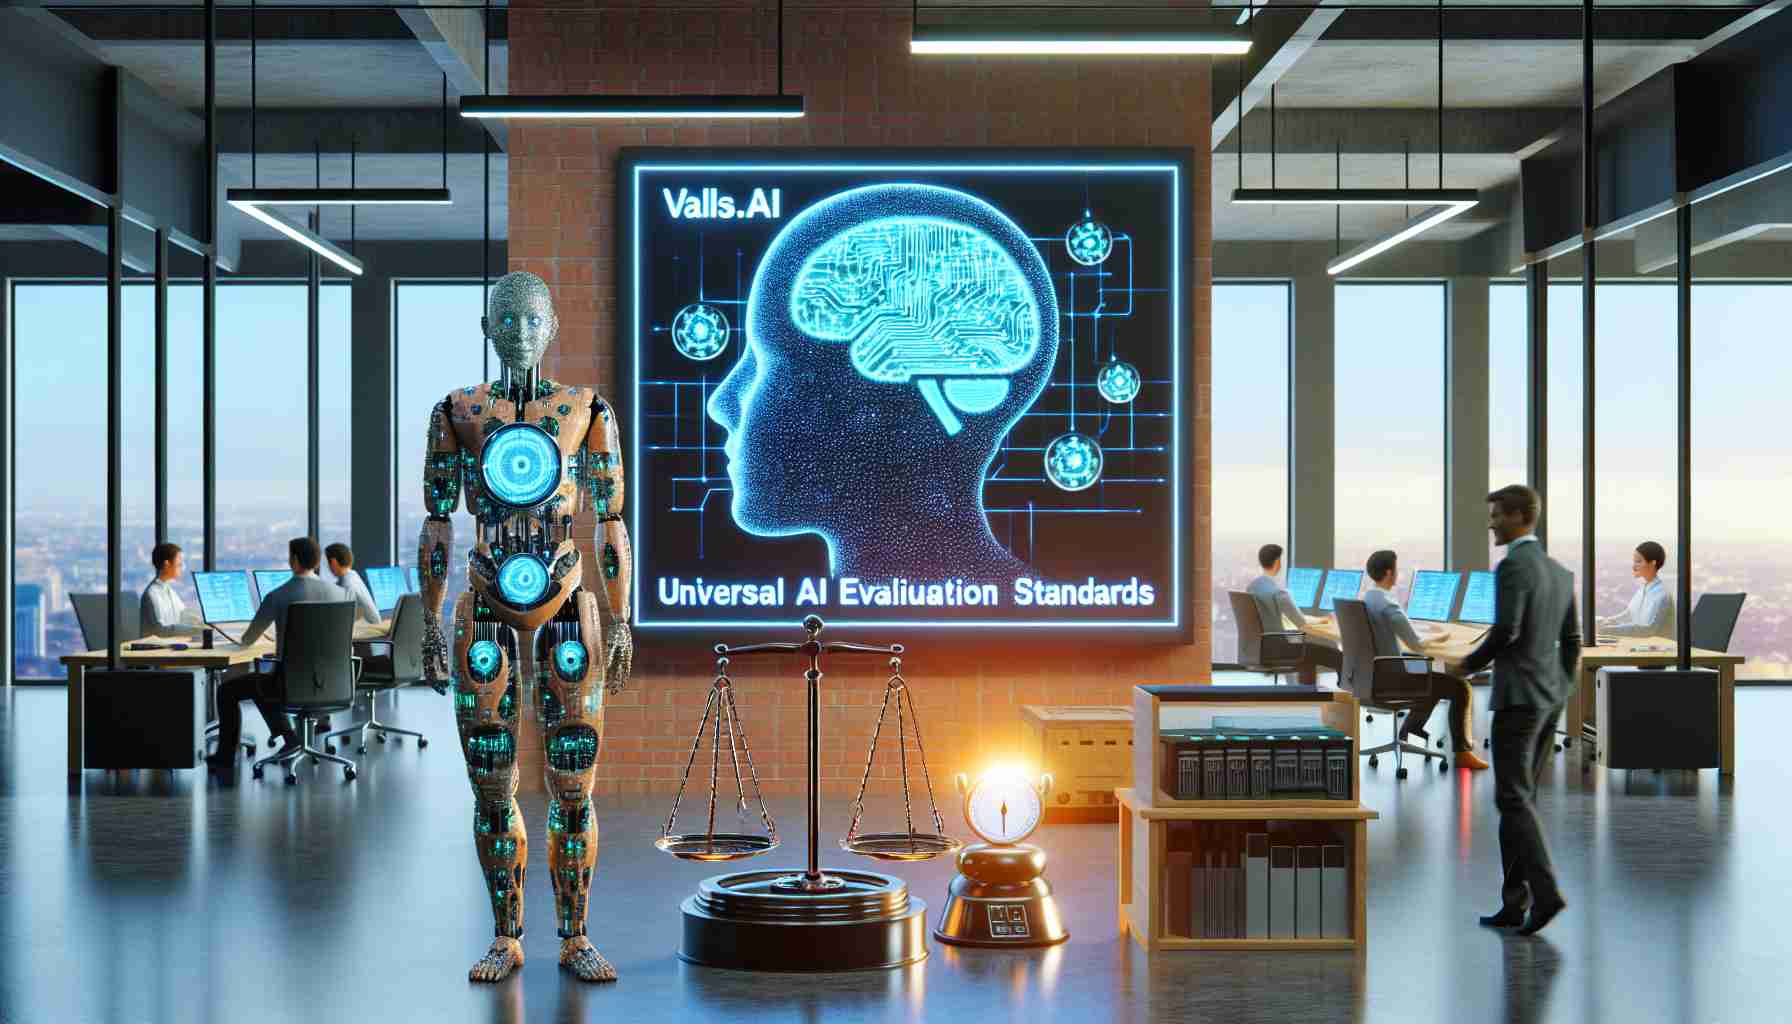 Emerging Startup Vals.ai Proposes Universal AI Evaluation Standards